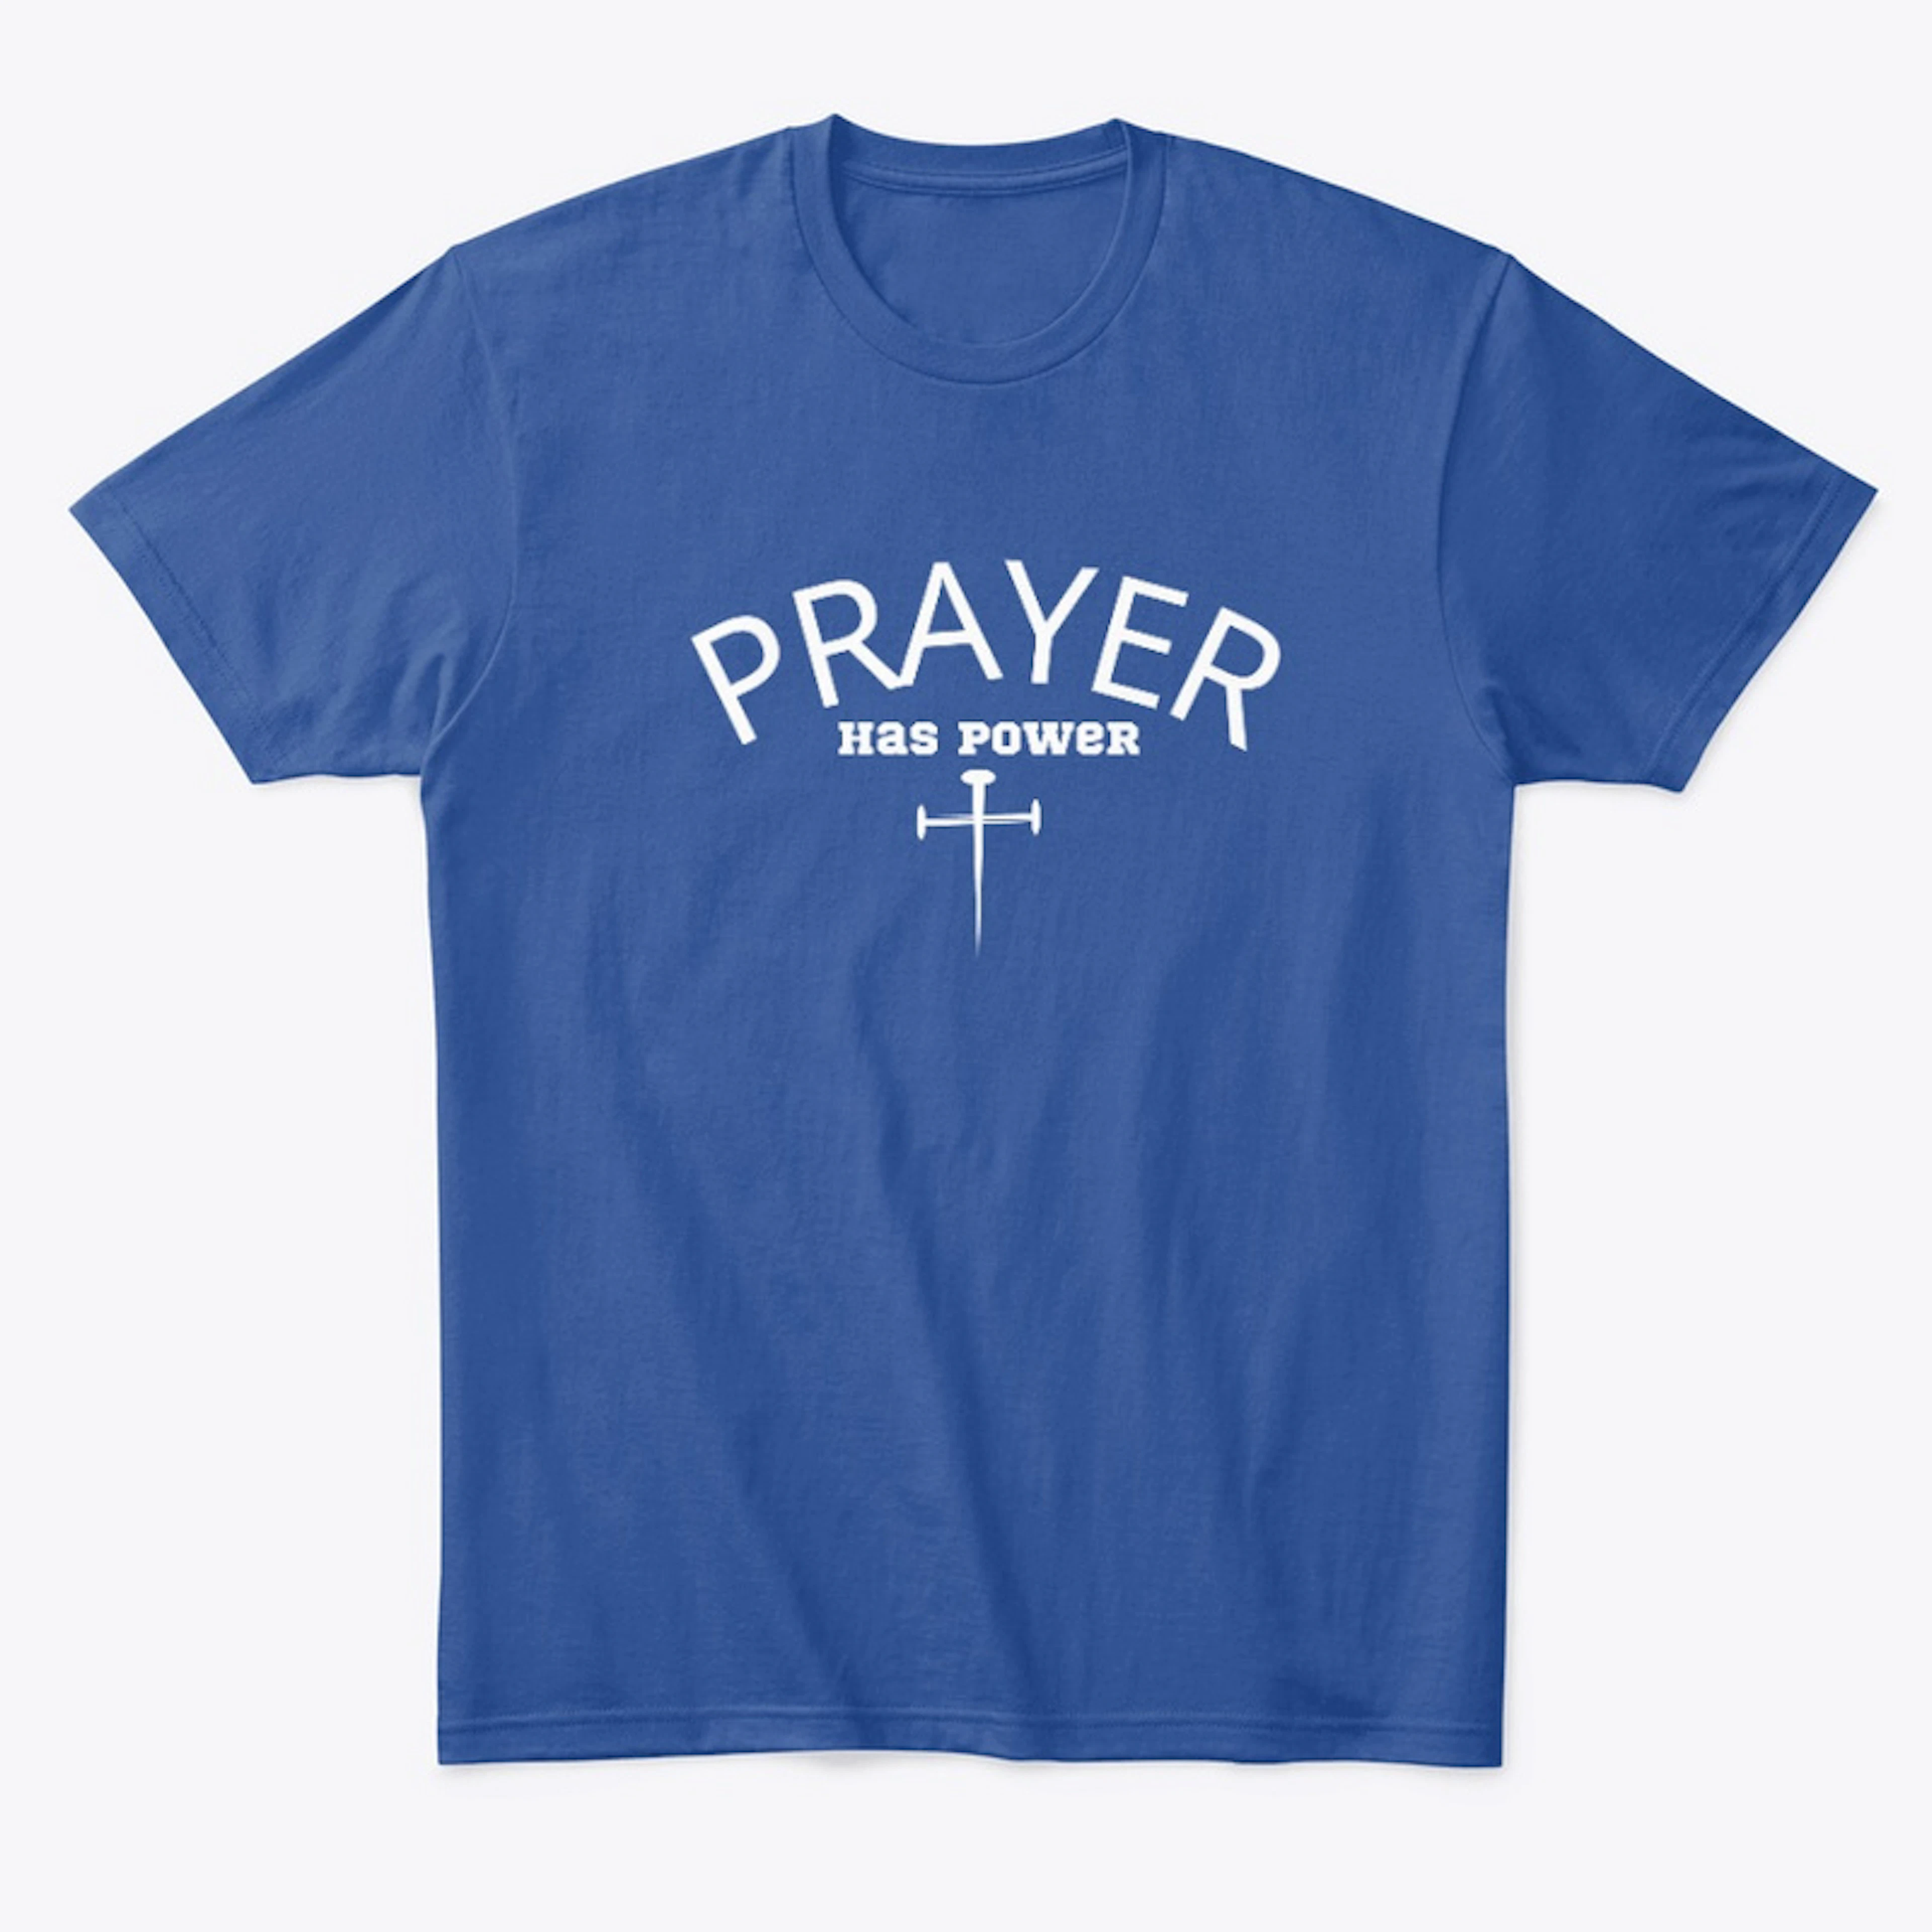 Prayer has Power Collection